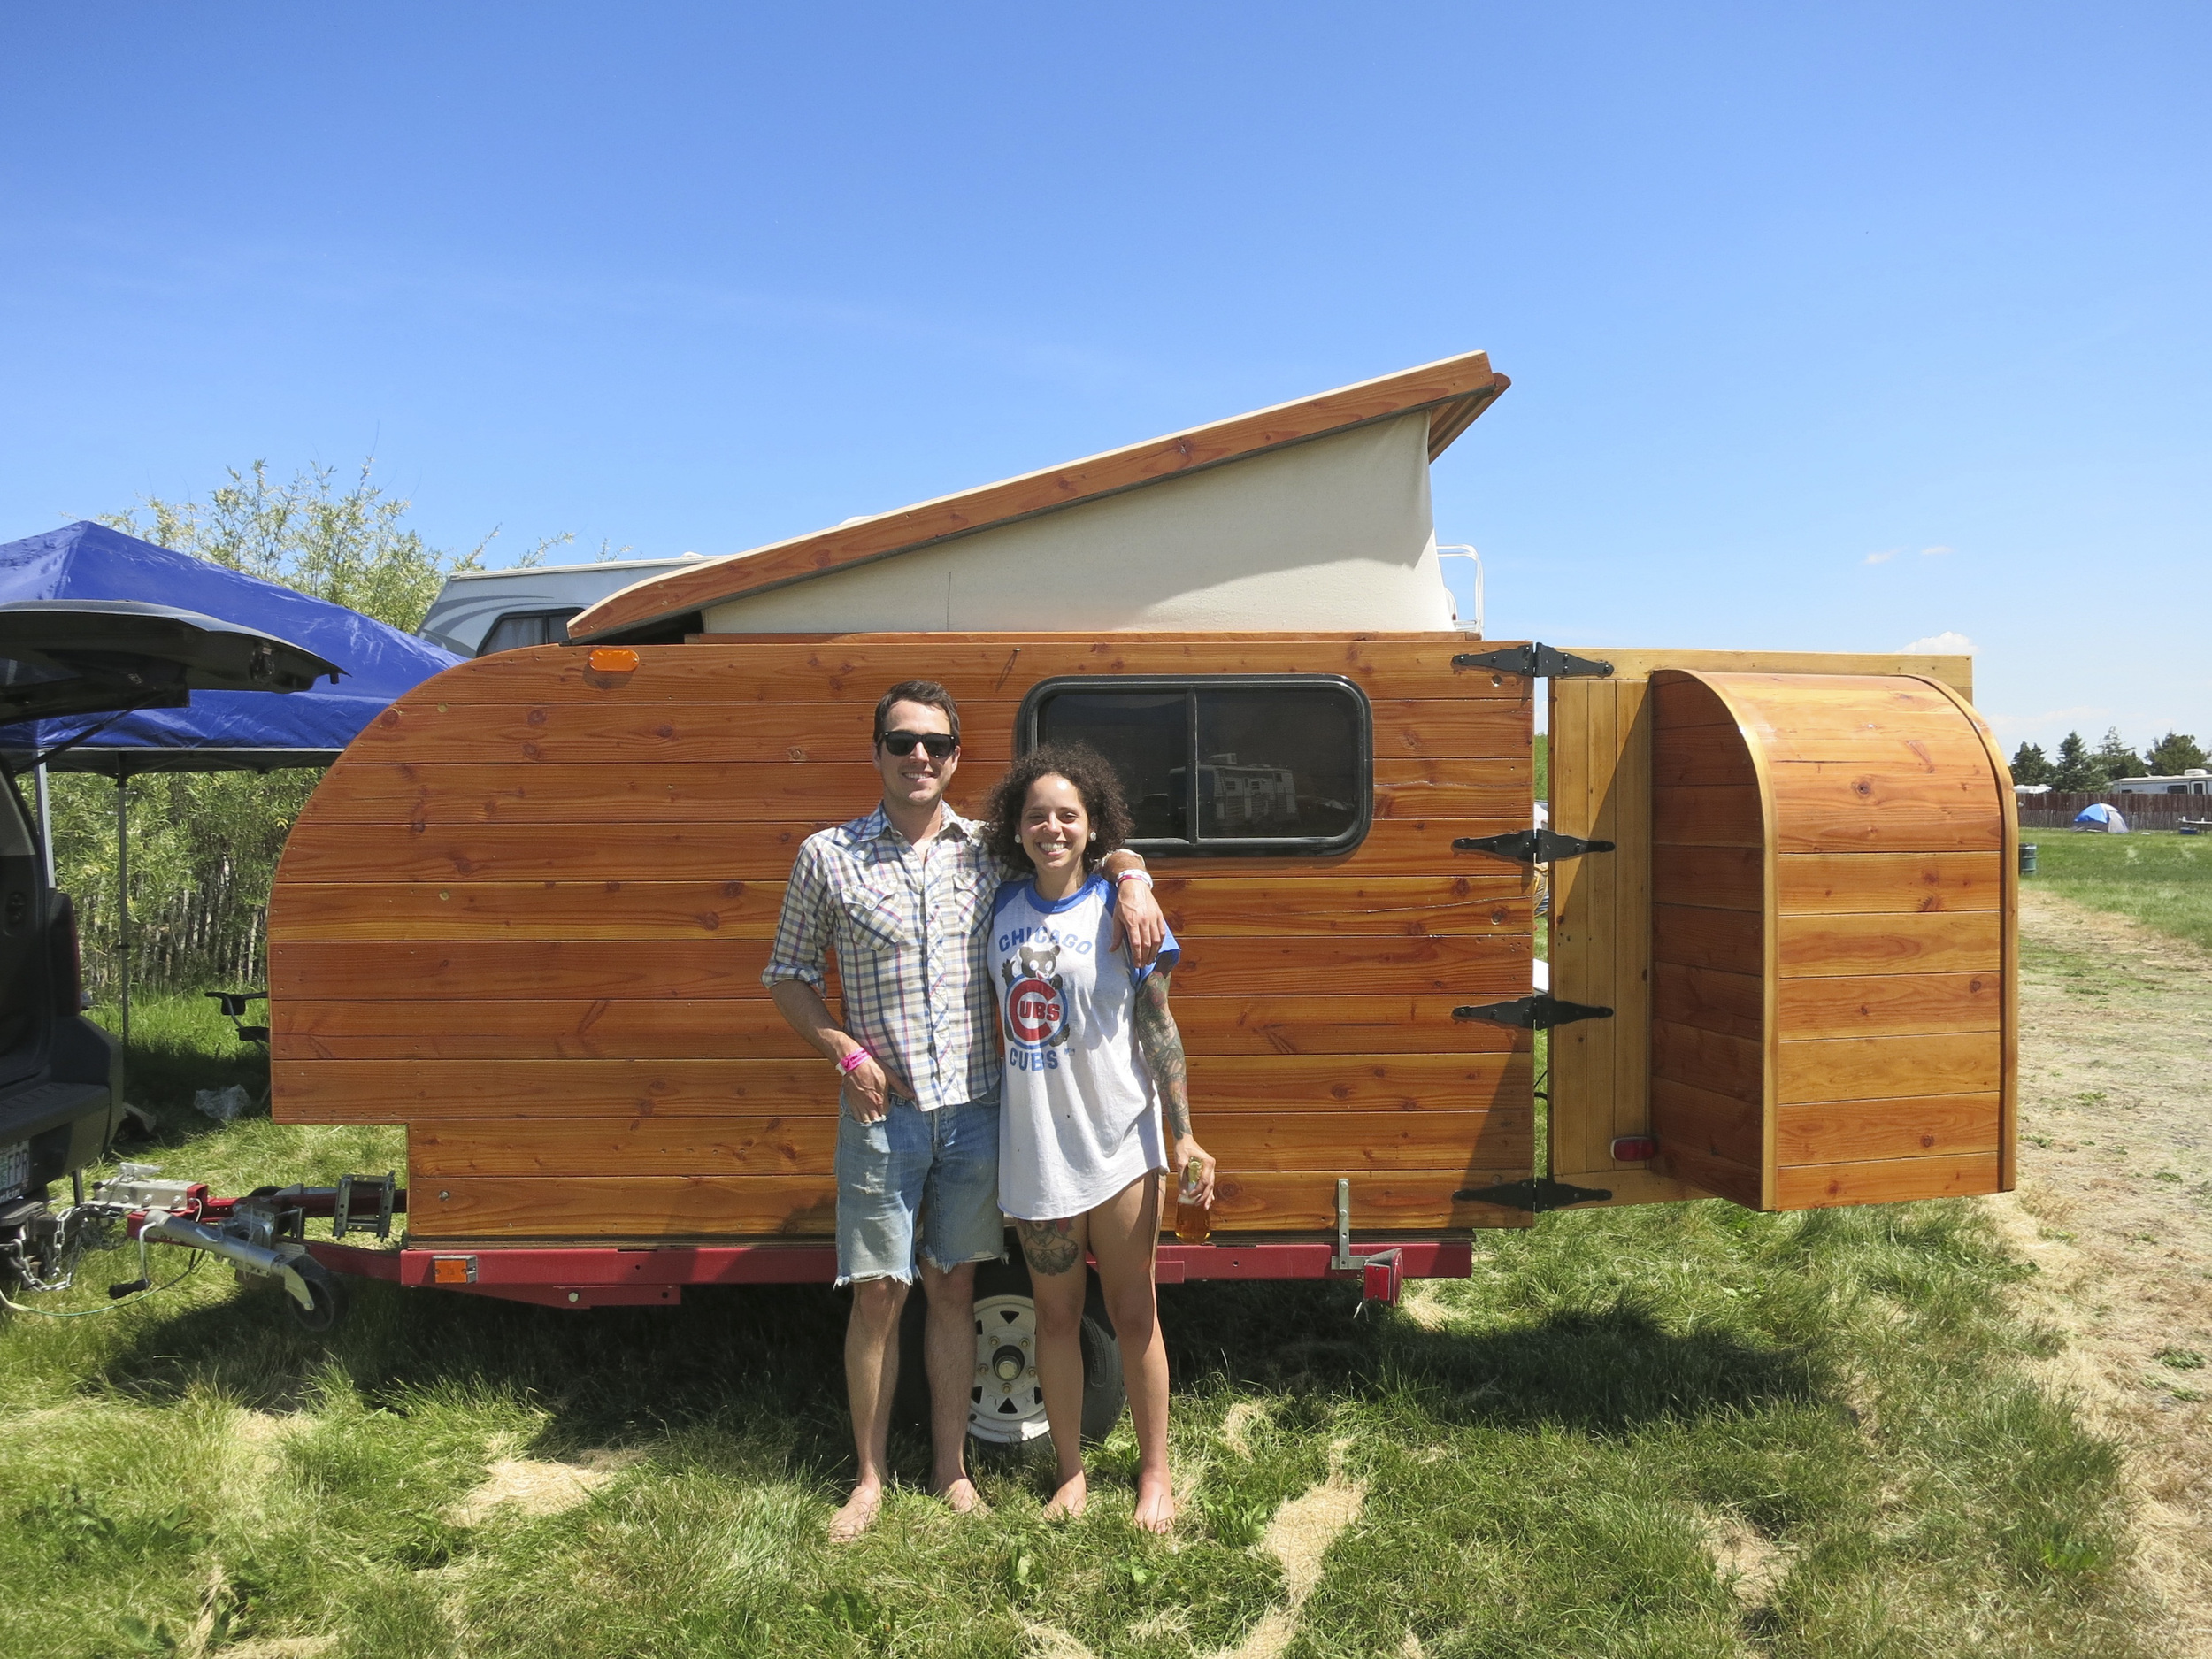 Our new friends had a rad homebuilt trailer